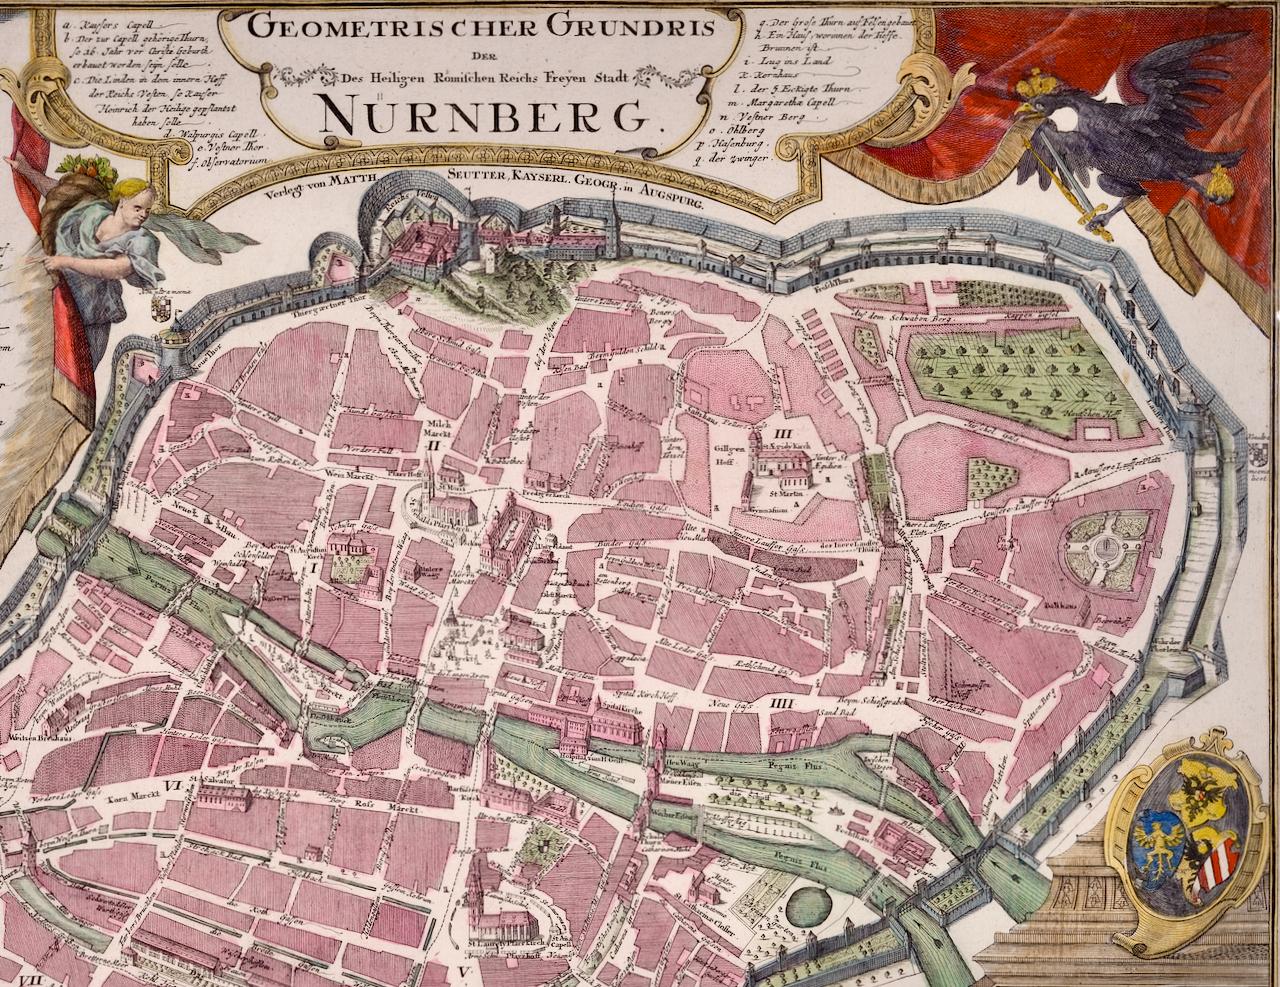 An 18th century hand-colored city view of Nuremburg, Germany entitled 